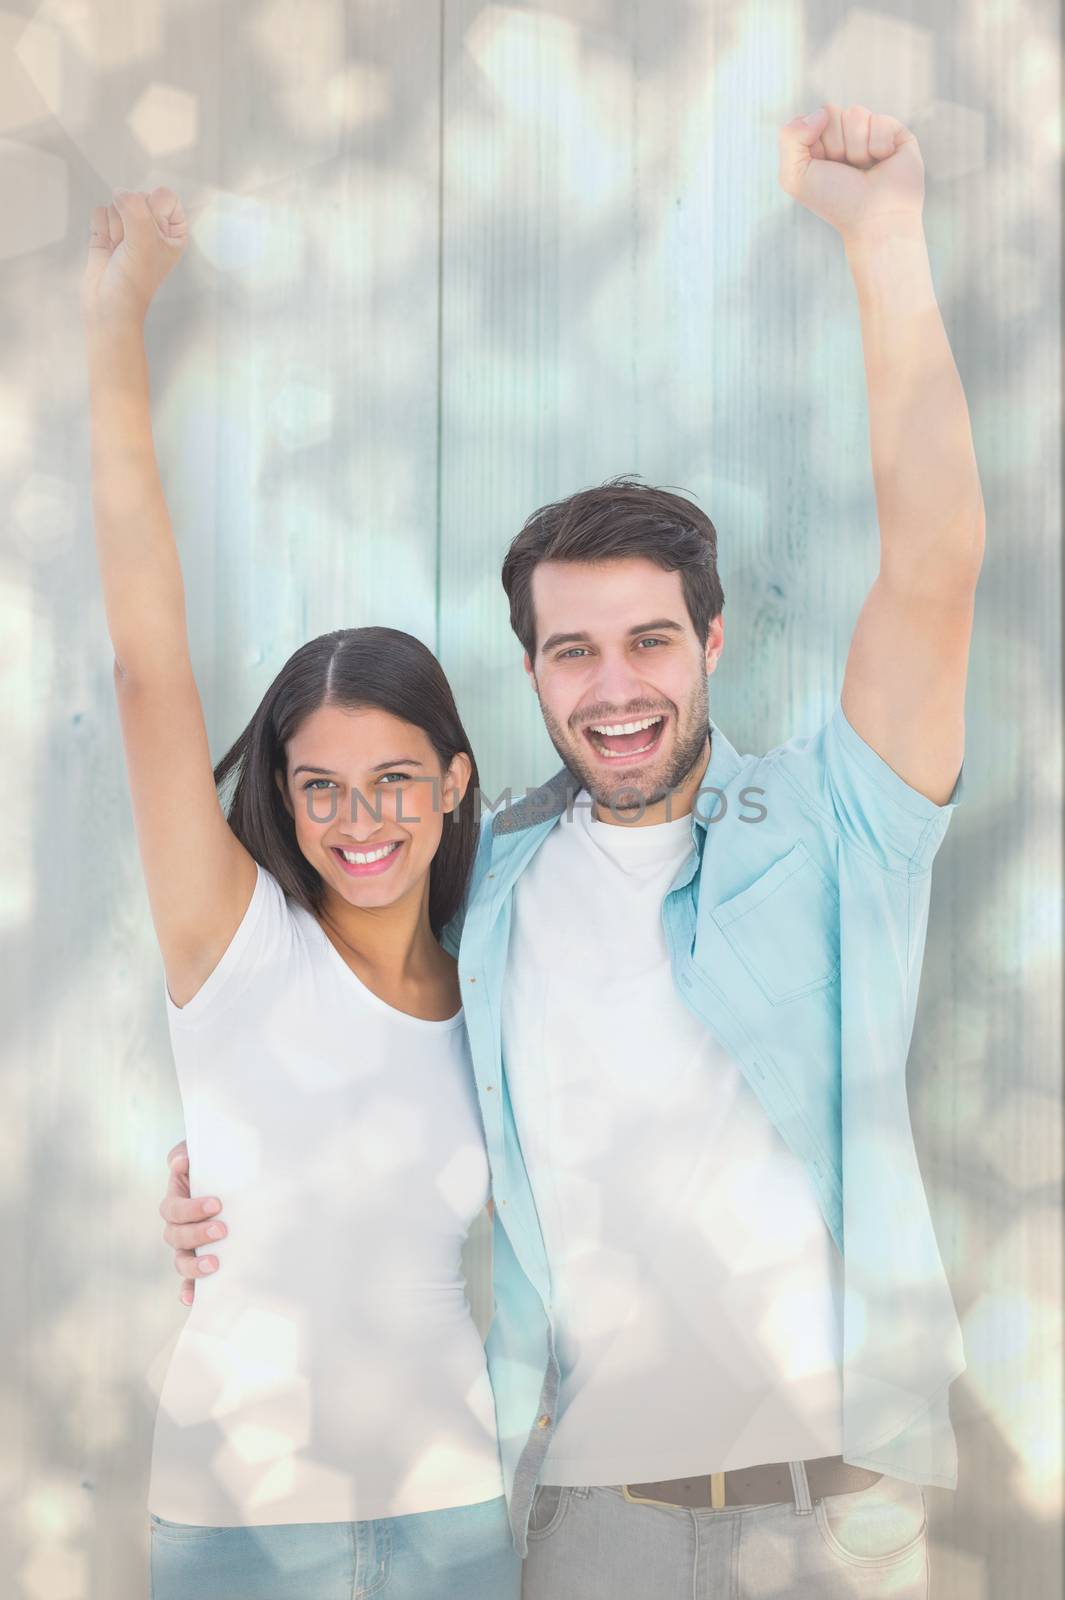 Composite image of happy casual couple cheering together by Wavebreakmedia